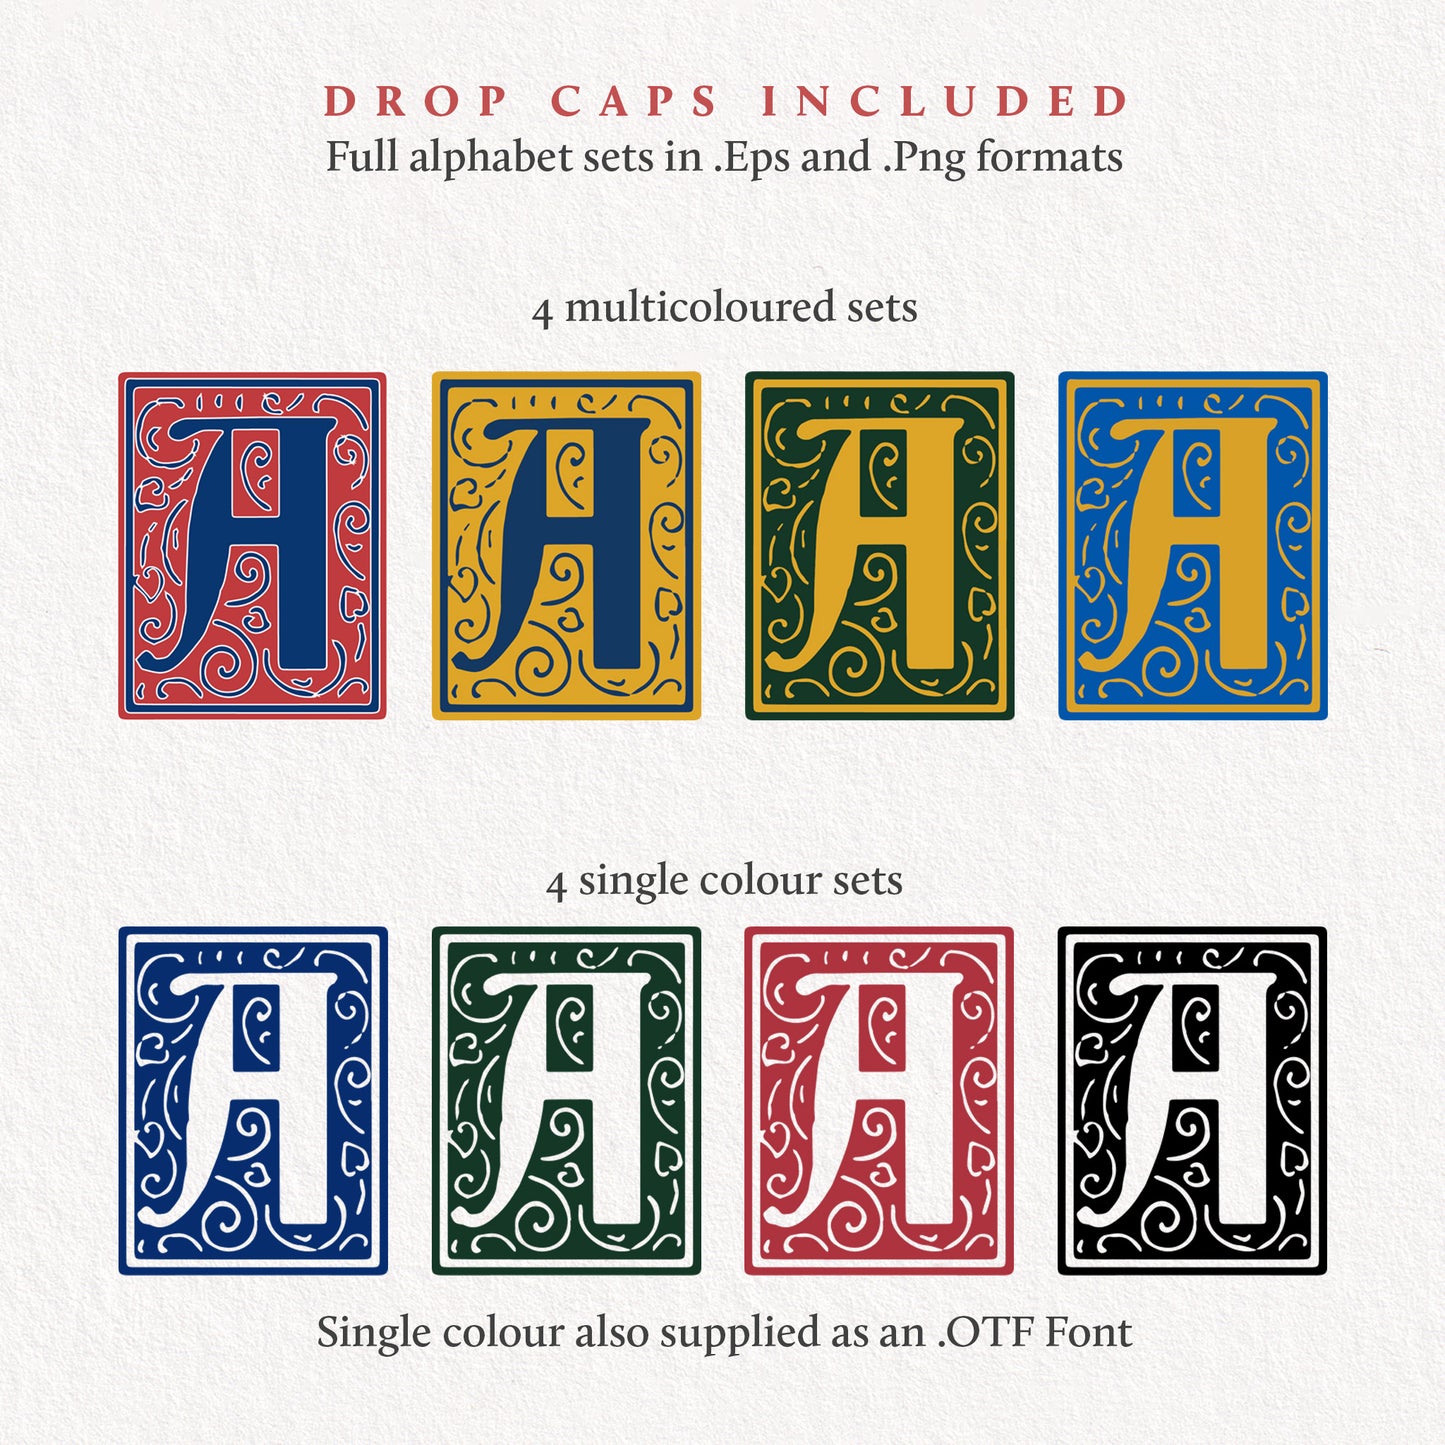 sample of 8 colourful drop caps letters set on a light background